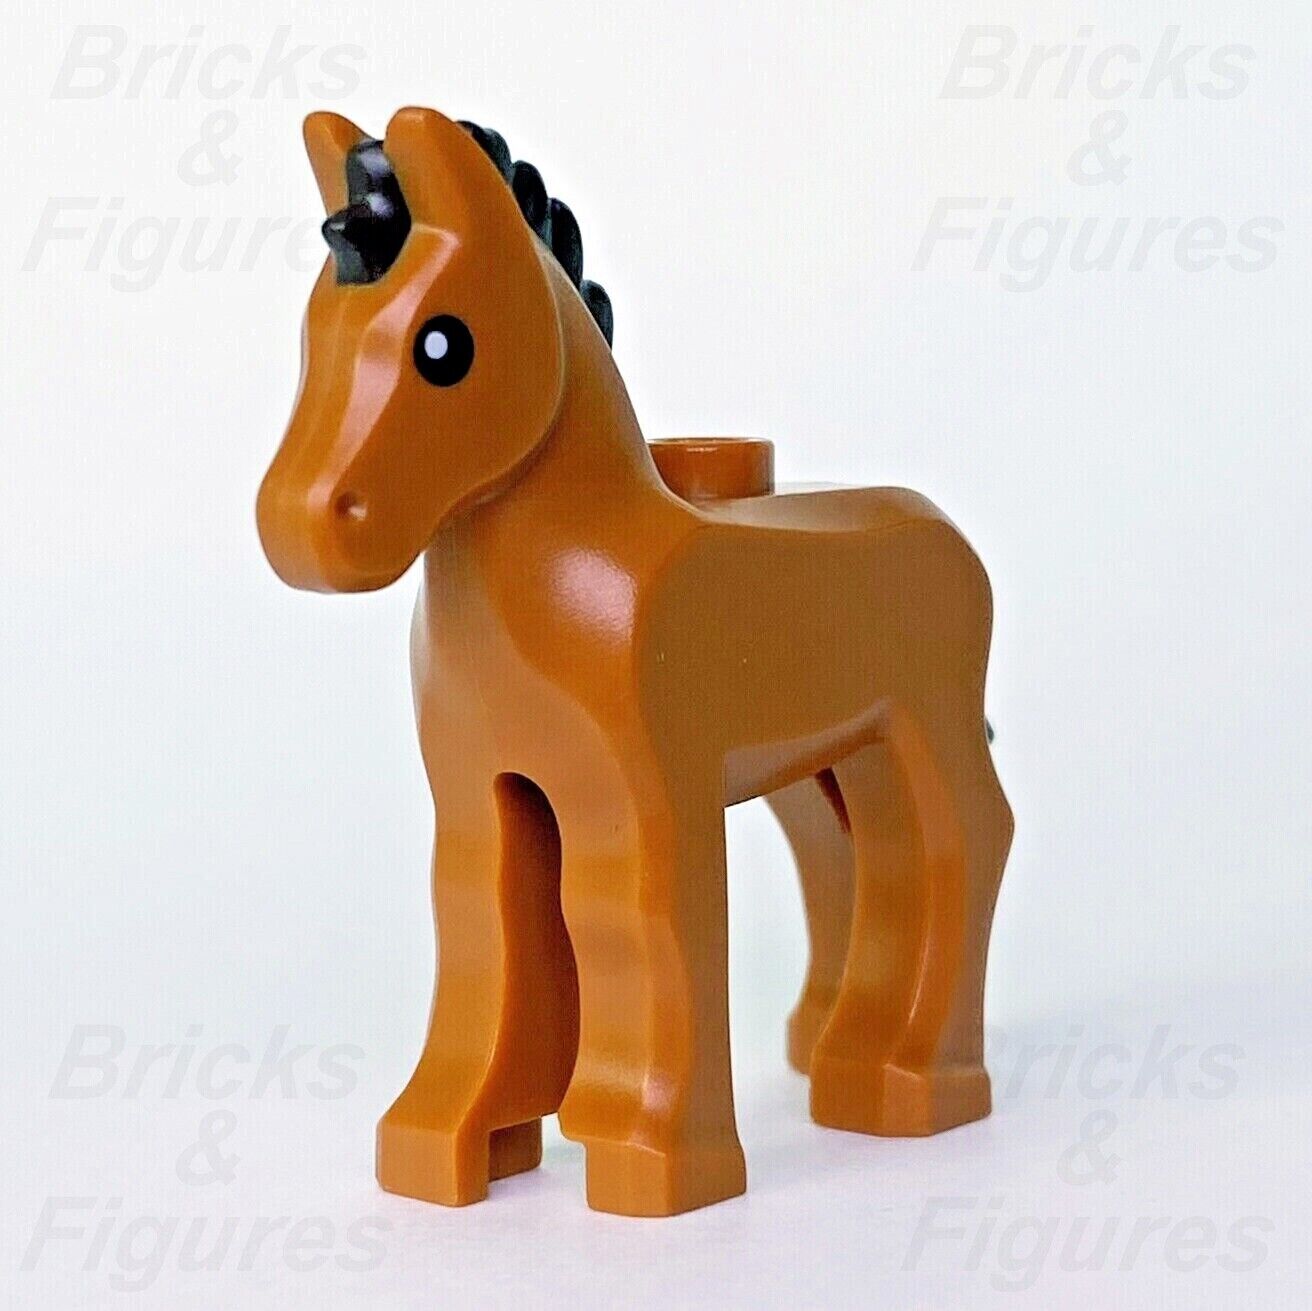 New Collectible Minifigures LEGO Baby Horse Foal Series 22 Animal Part 71032 - Bricks & Figures